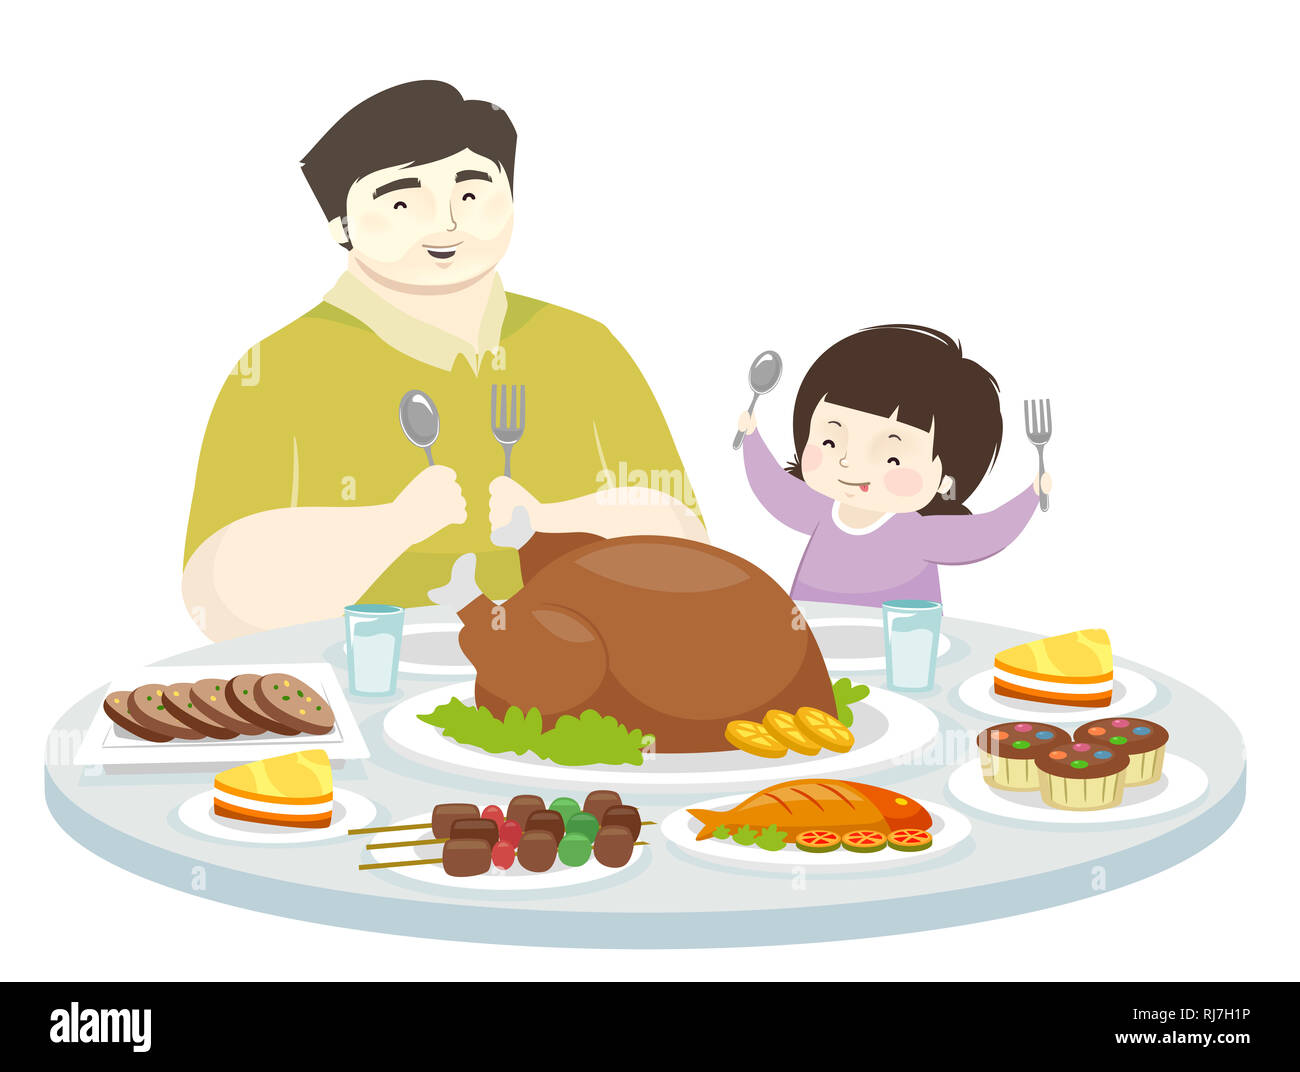 Illustration of a Kid Girl and Father Holding Spoon and Fork Ready to Eat a Big Meal Stock Photo